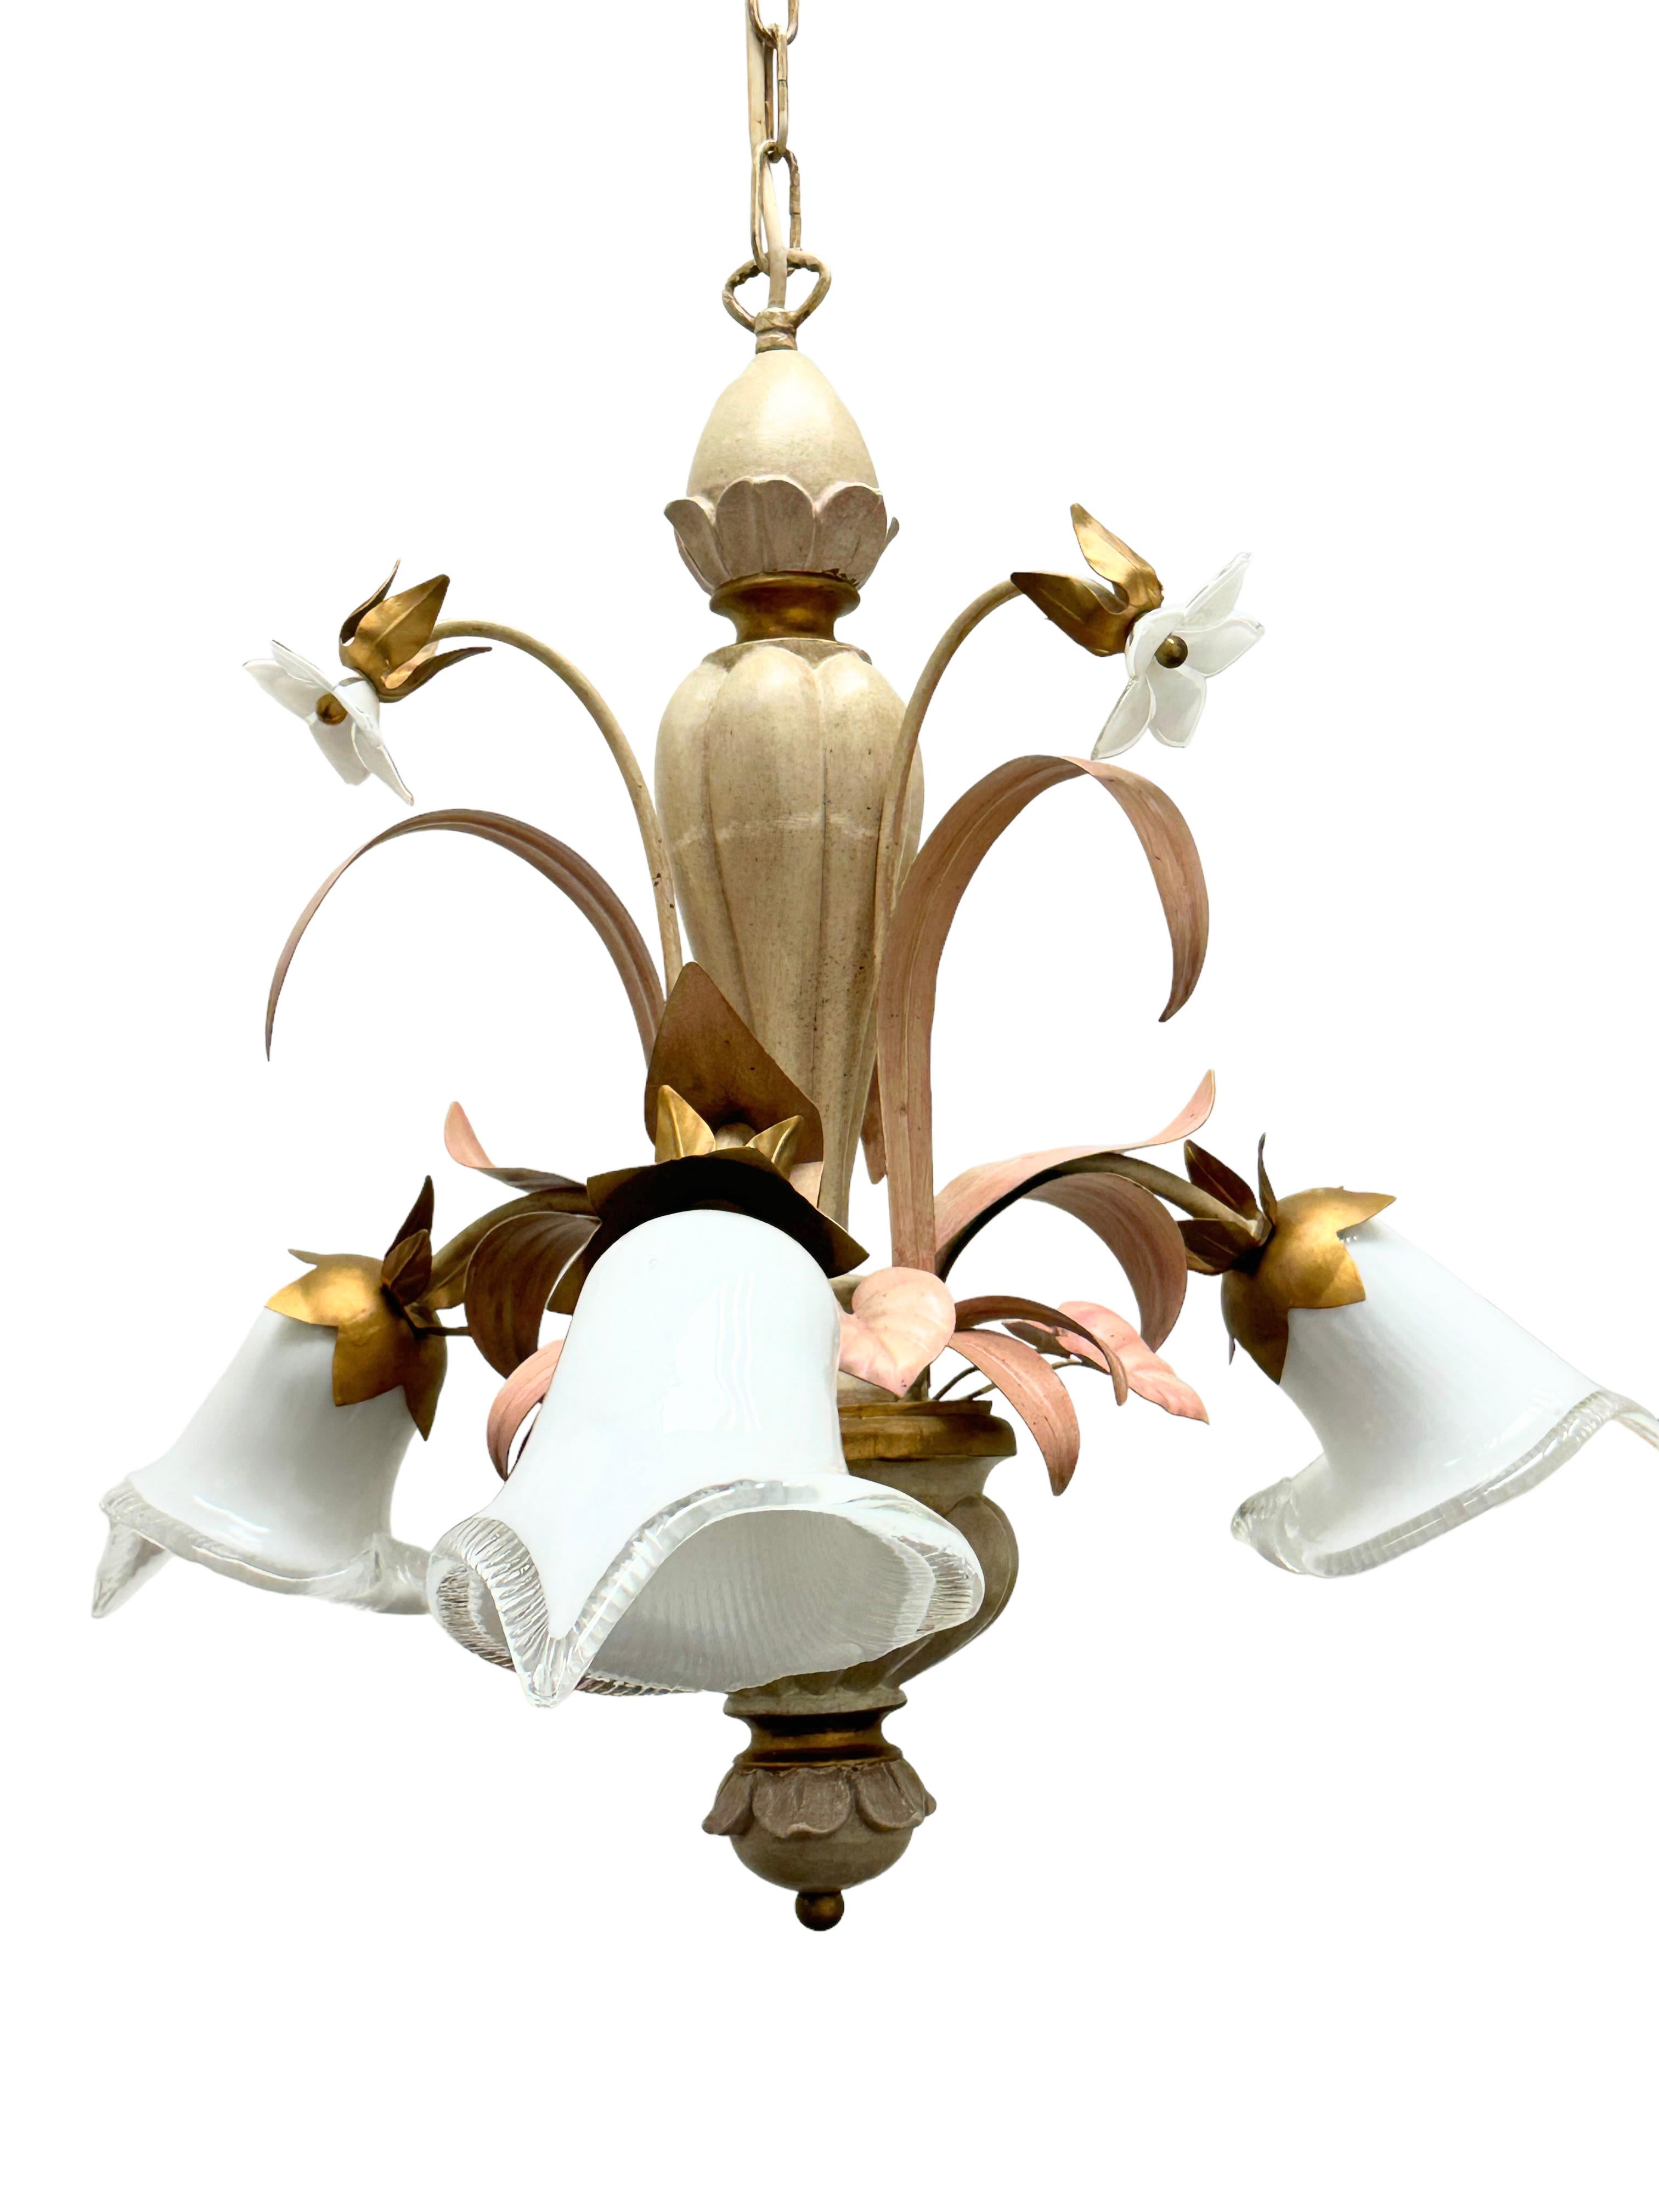 A beautiful chandelier with three lights that was made in Austria, by Eglo Leuchten, circa 1980s.
The chandelier is made in polychrome hand carved wood and metal, with glass shades. The color combination of the chandelier is very special and it